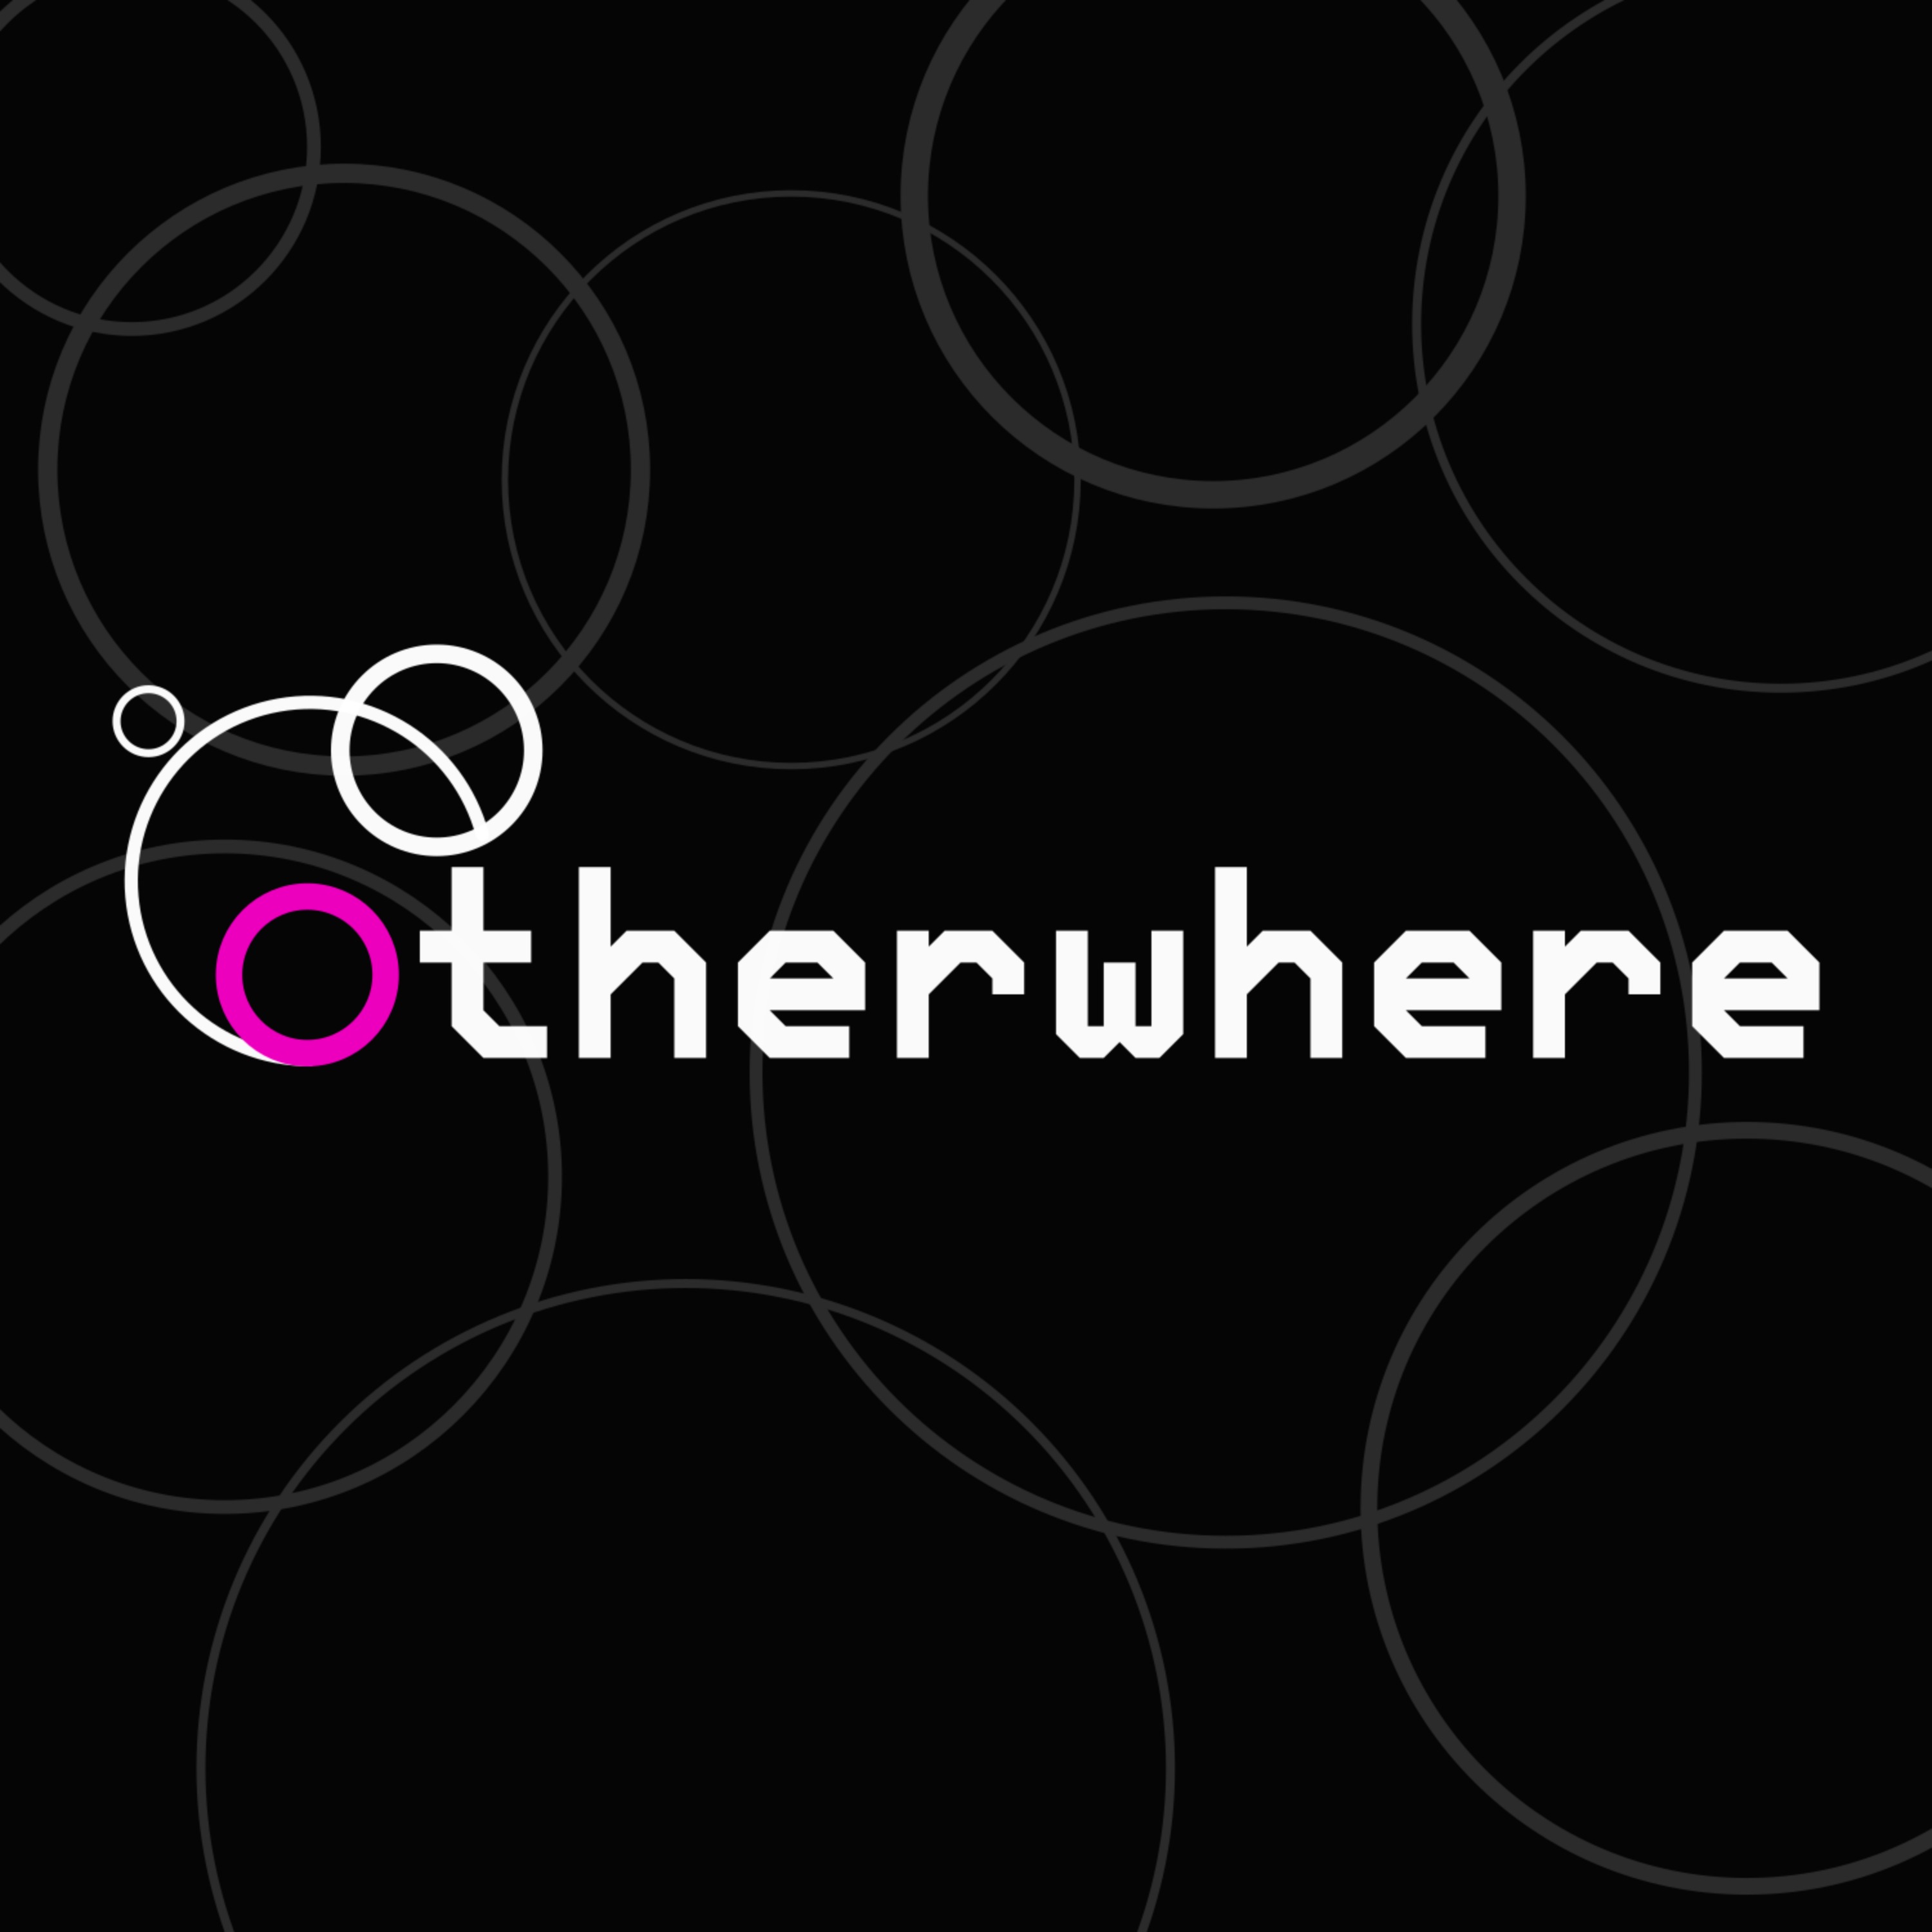 Welcome to a Series of Otherwhere Announcements & Updates